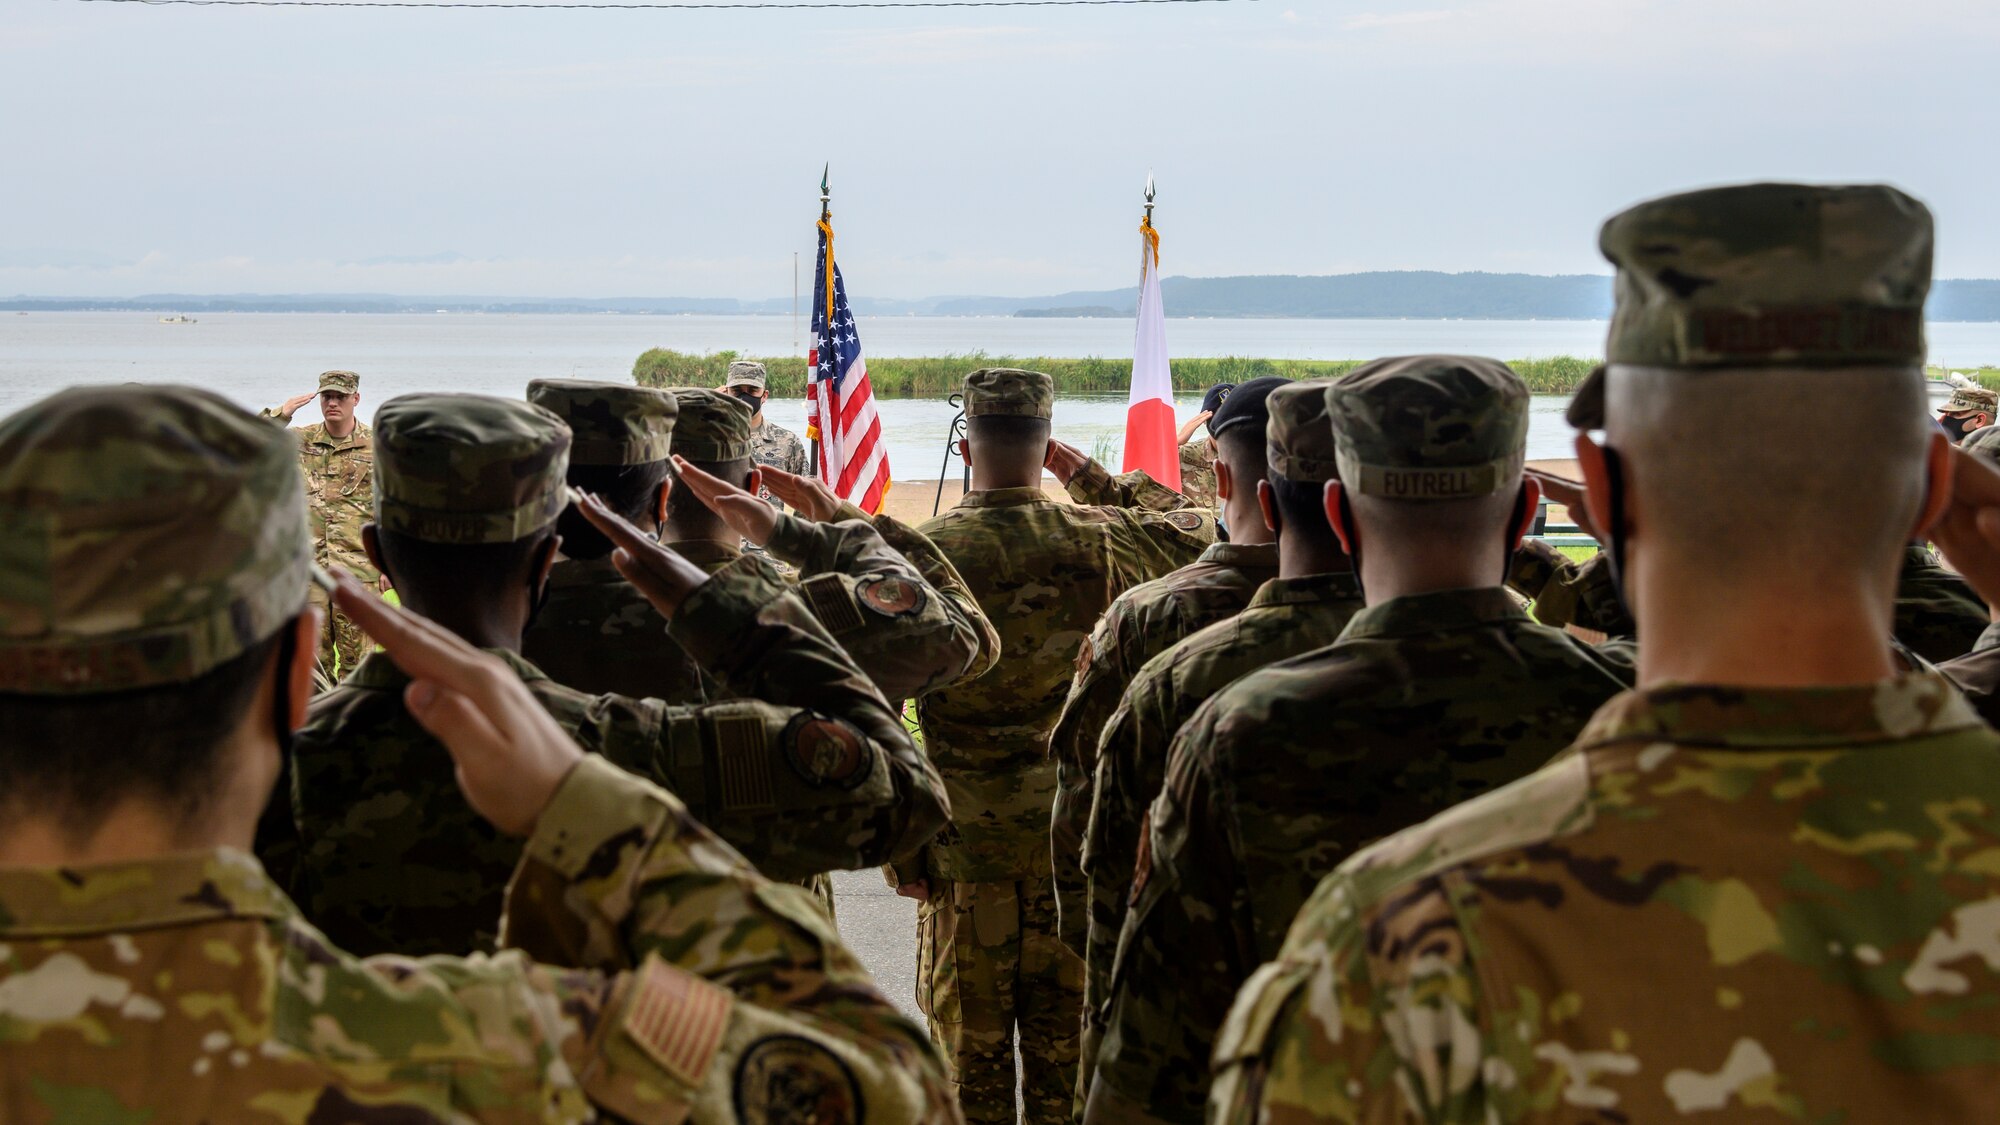 A group of Airmen salute the flag during a 9/11 memorial ceremony at Misawa Air Base, Japan, Sept. 11, 2020. Through participation in these events, the attendees ensured each of the firefighters lost during 9/11 were honored and that the world knows that they will never forget. (U.S. Air Force photo by Airman 1st Class China M. Shock)